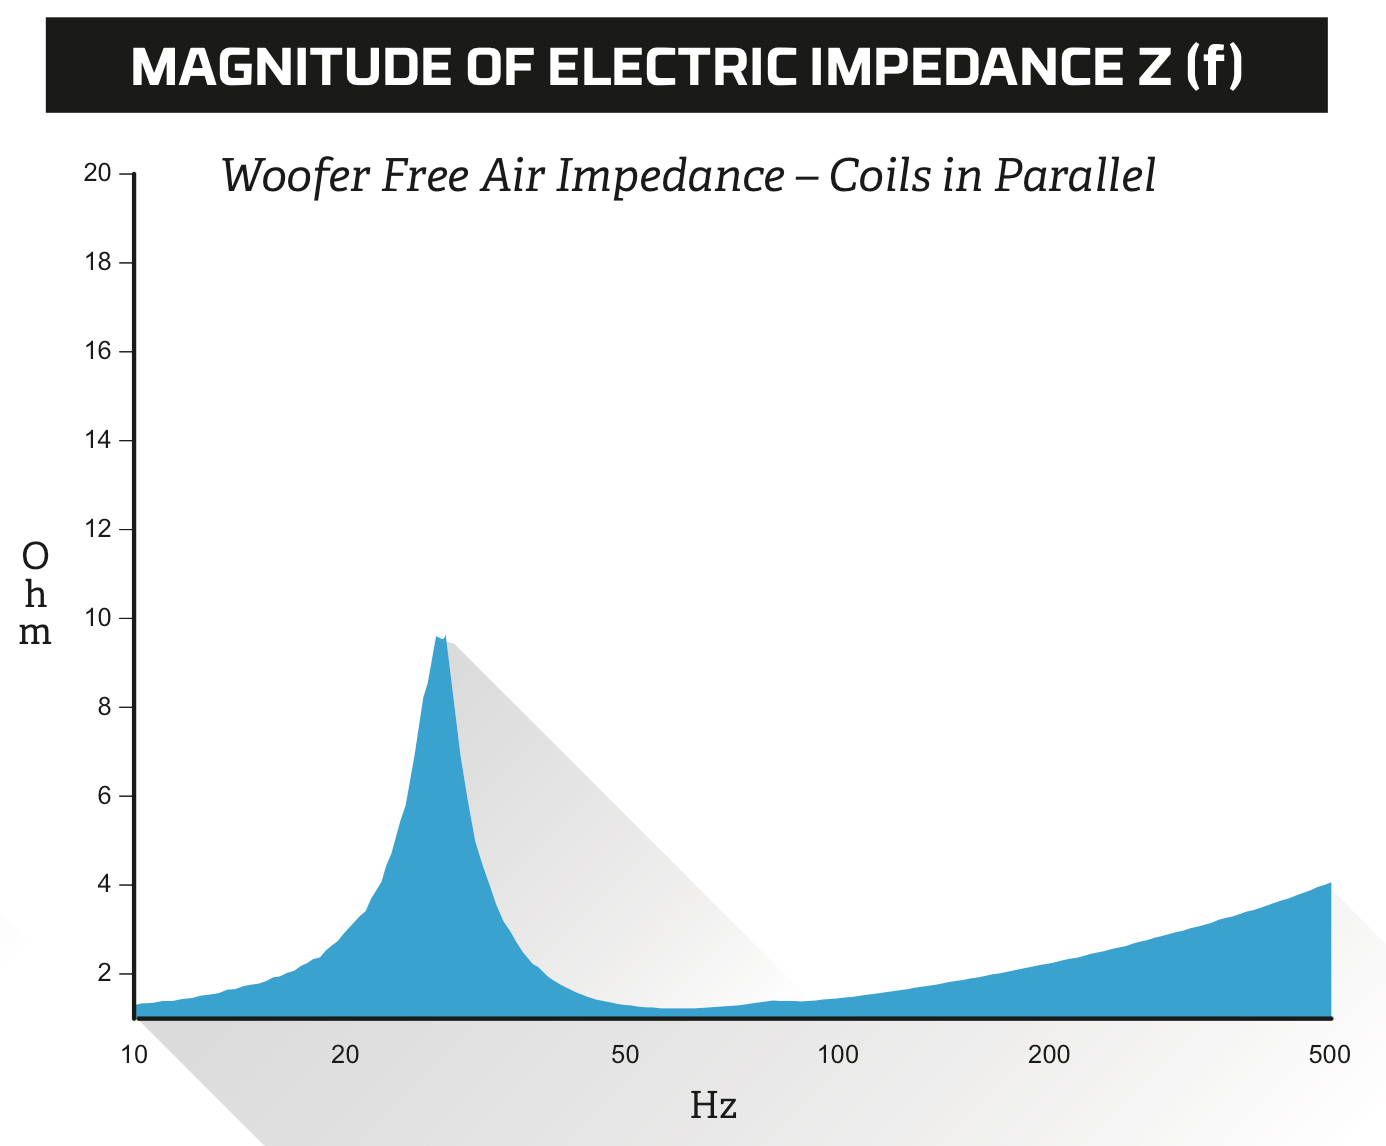 Woofer Free Air Impedance - Coils in Parallel